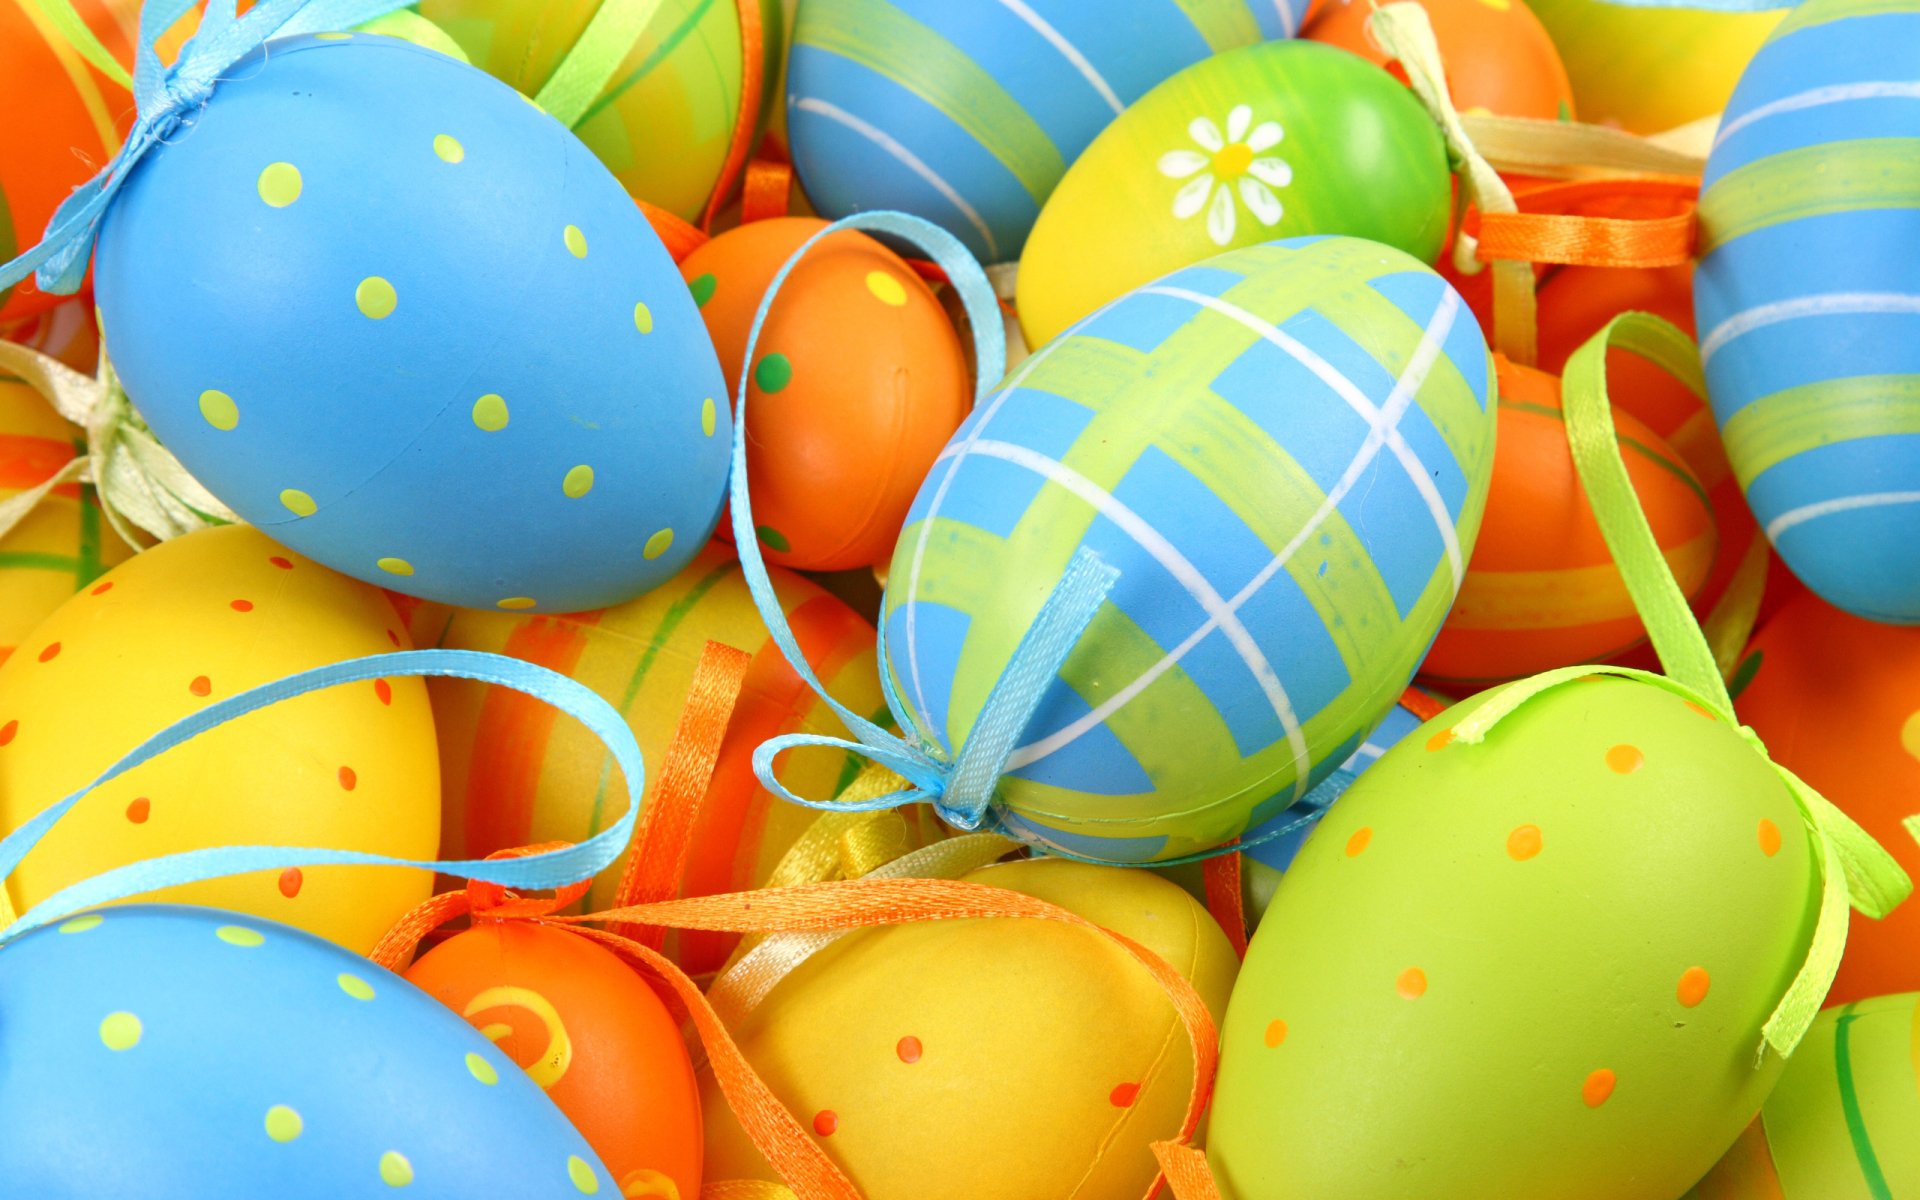 Easter Egg HD Wallpaper and Background Image